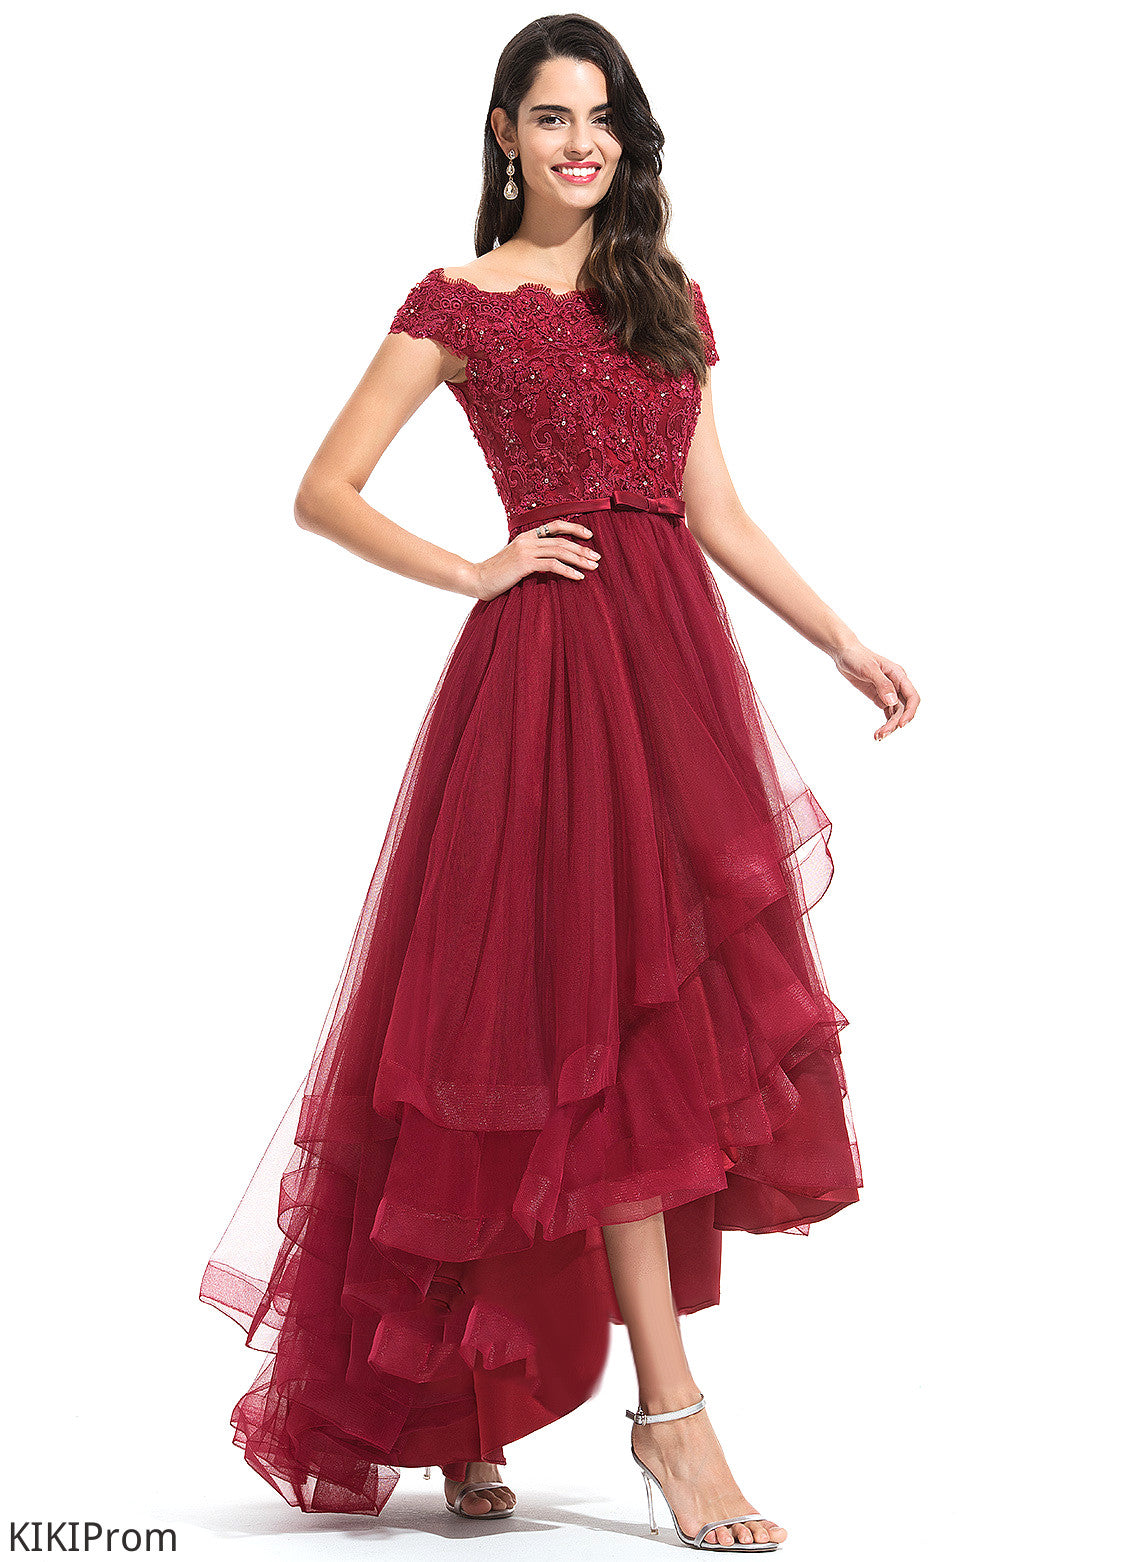 Dress Tulle Bow(s) Homecoming Dresses Homecoming A-Line Neveah Asymmetrical Off-the-Shoulder Beading With Lace